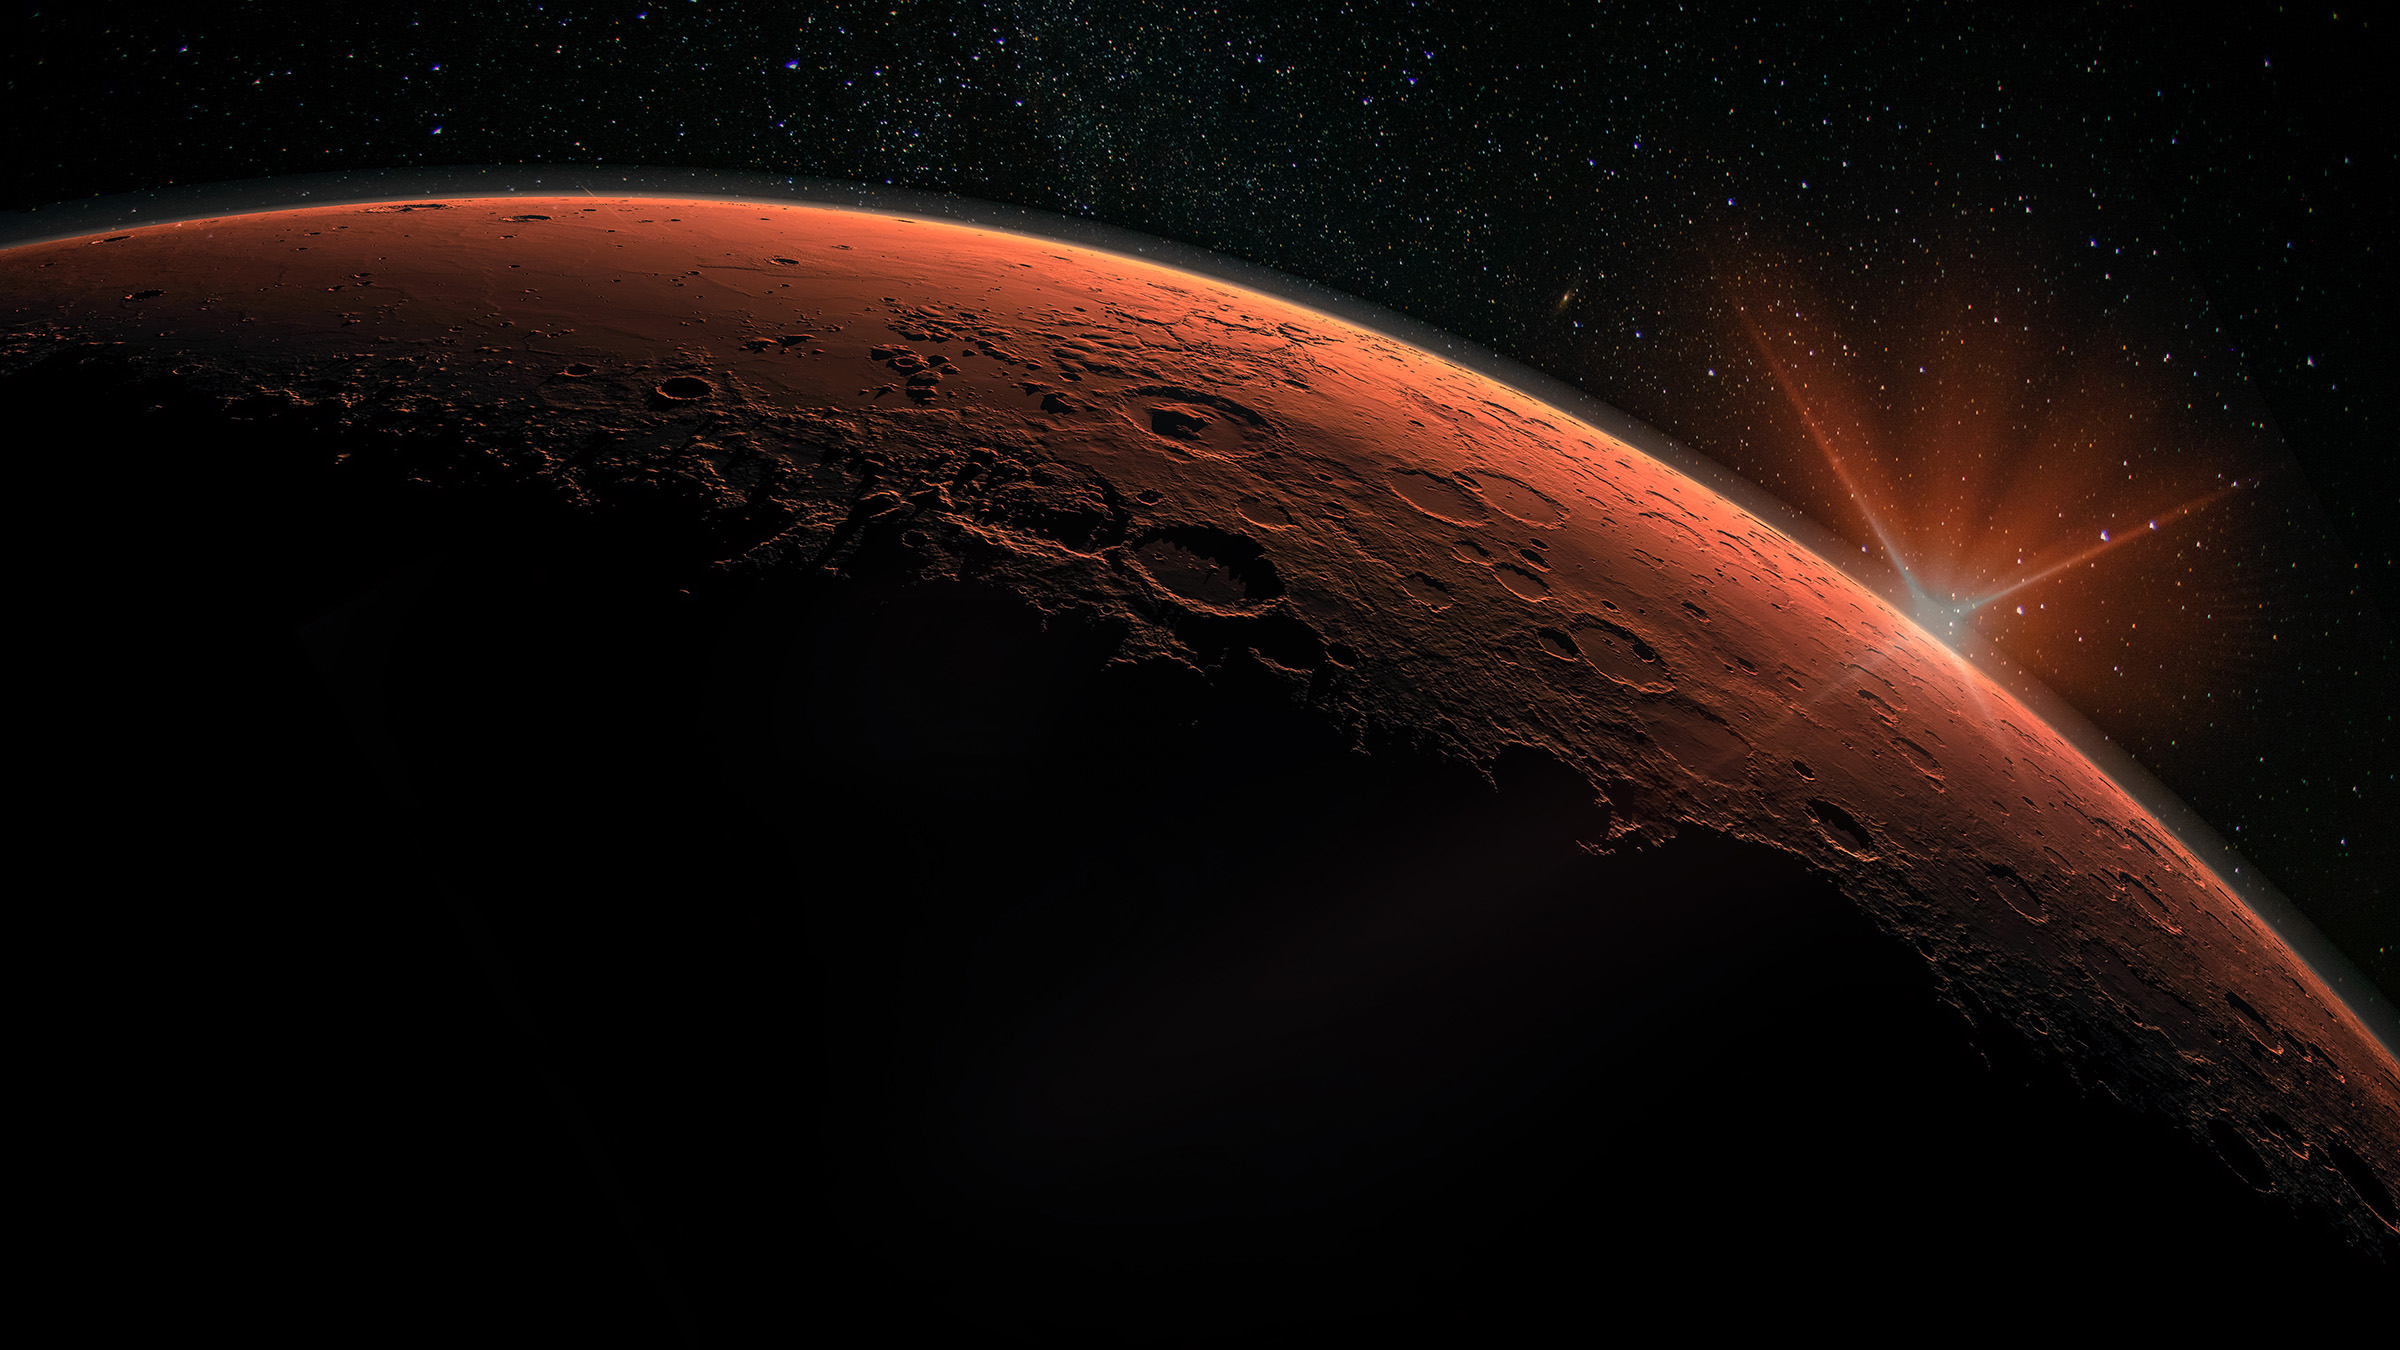 An artist's impression of a sunrise from above the reddish-brown surface of Mars